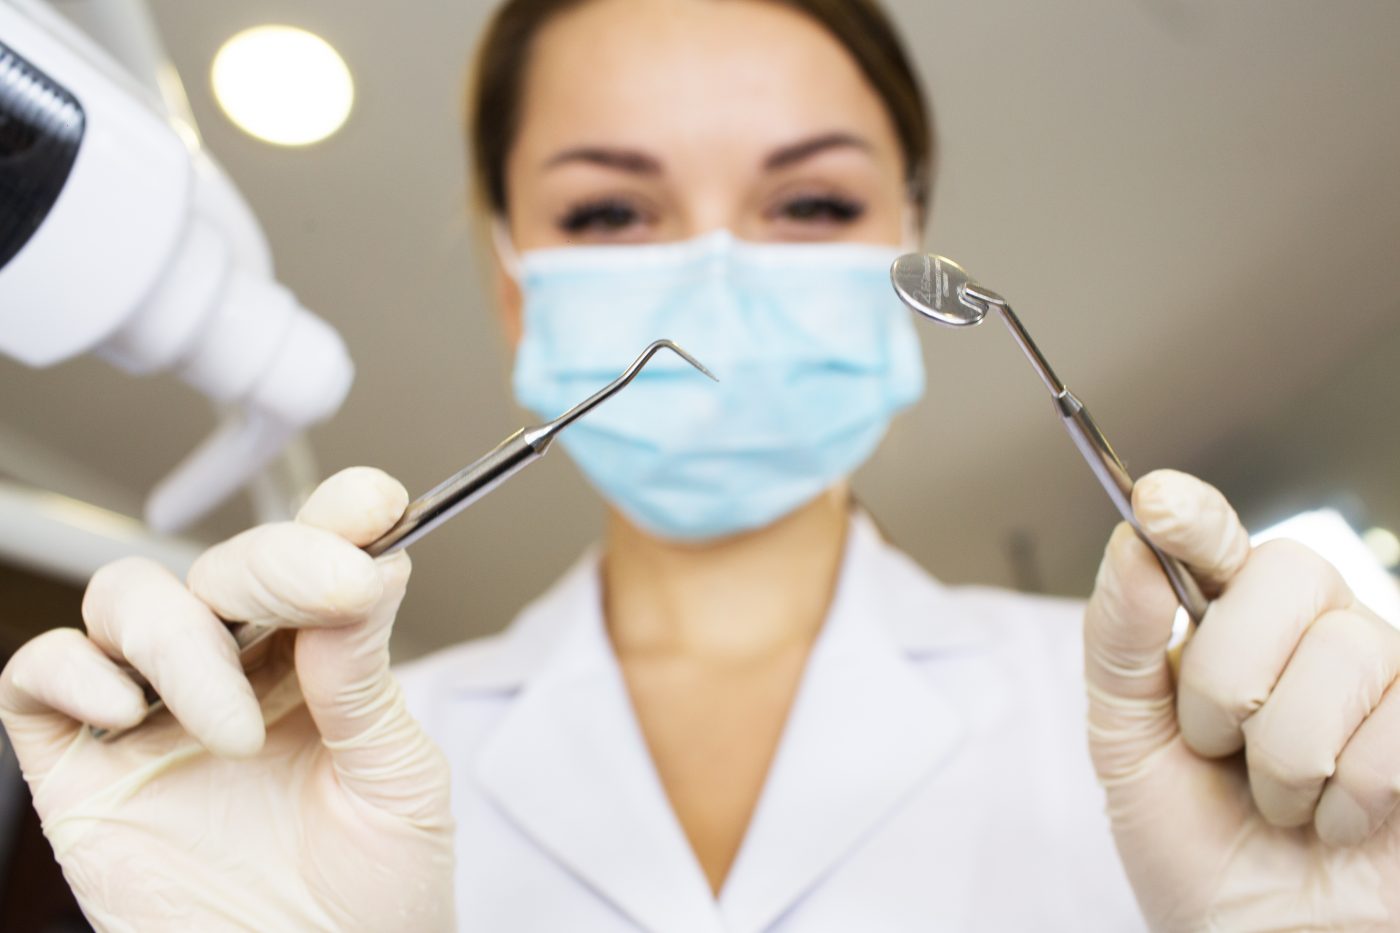 young women dentist with sterile mask readily approaching a patient with dental instruments held in the hands protected with surgical gloves young dentist with sterile mask.Dentist